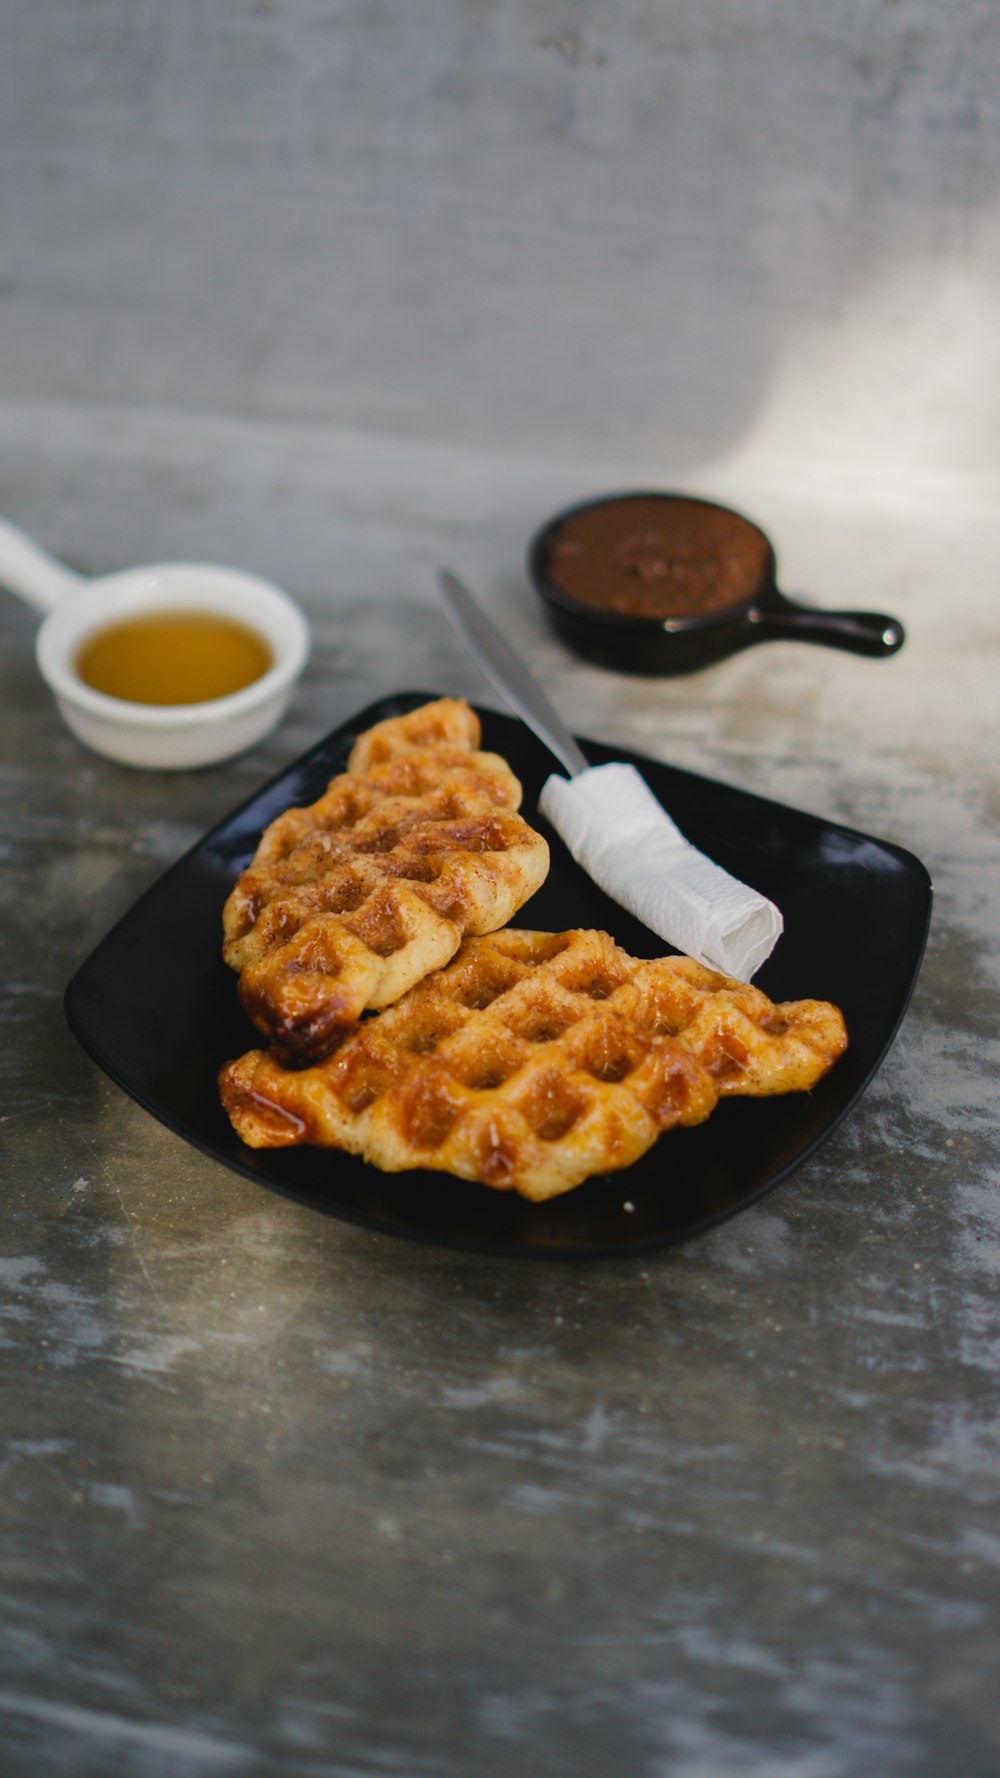 a plate of waffles and a bowl of dipping sauce